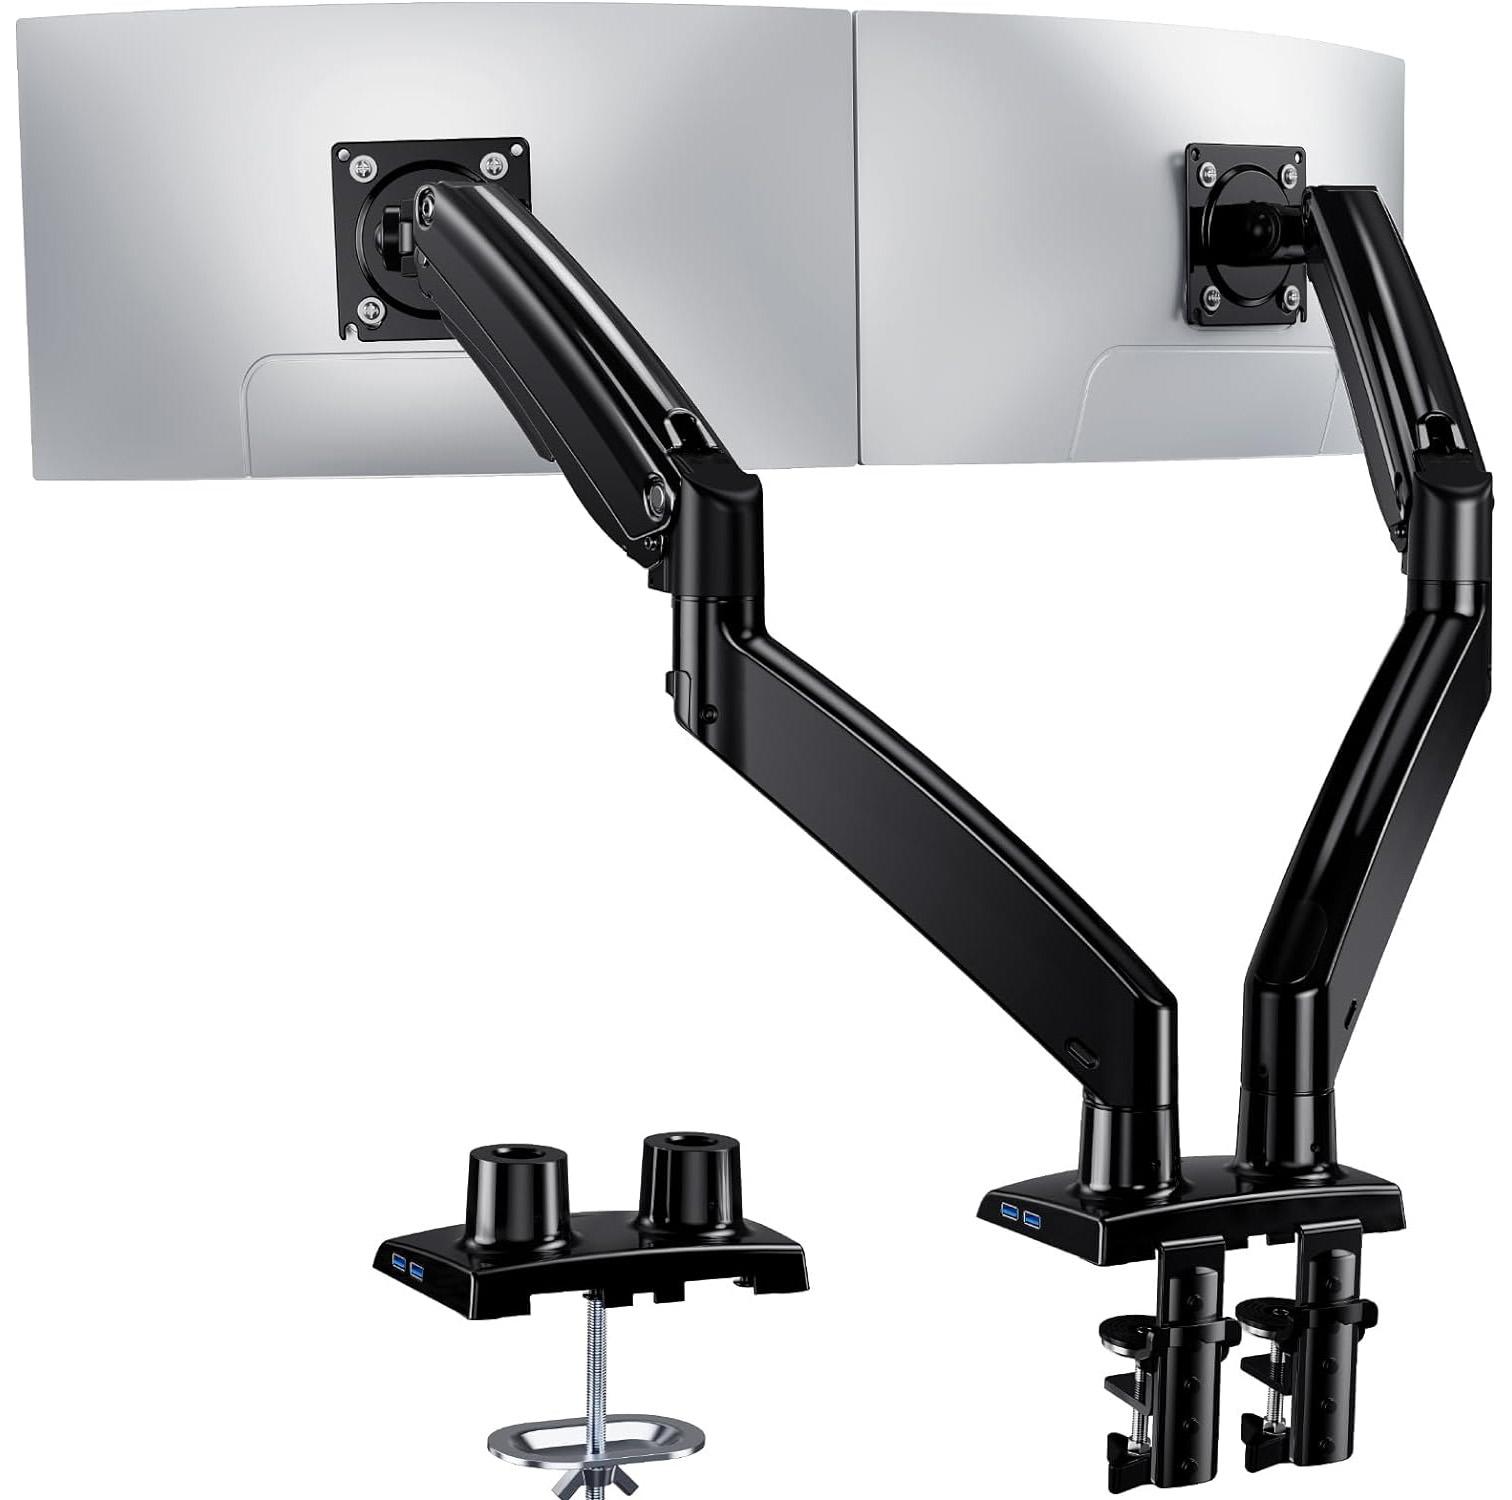 Huanao Dual Monitor Stand for $58.34 Shipped